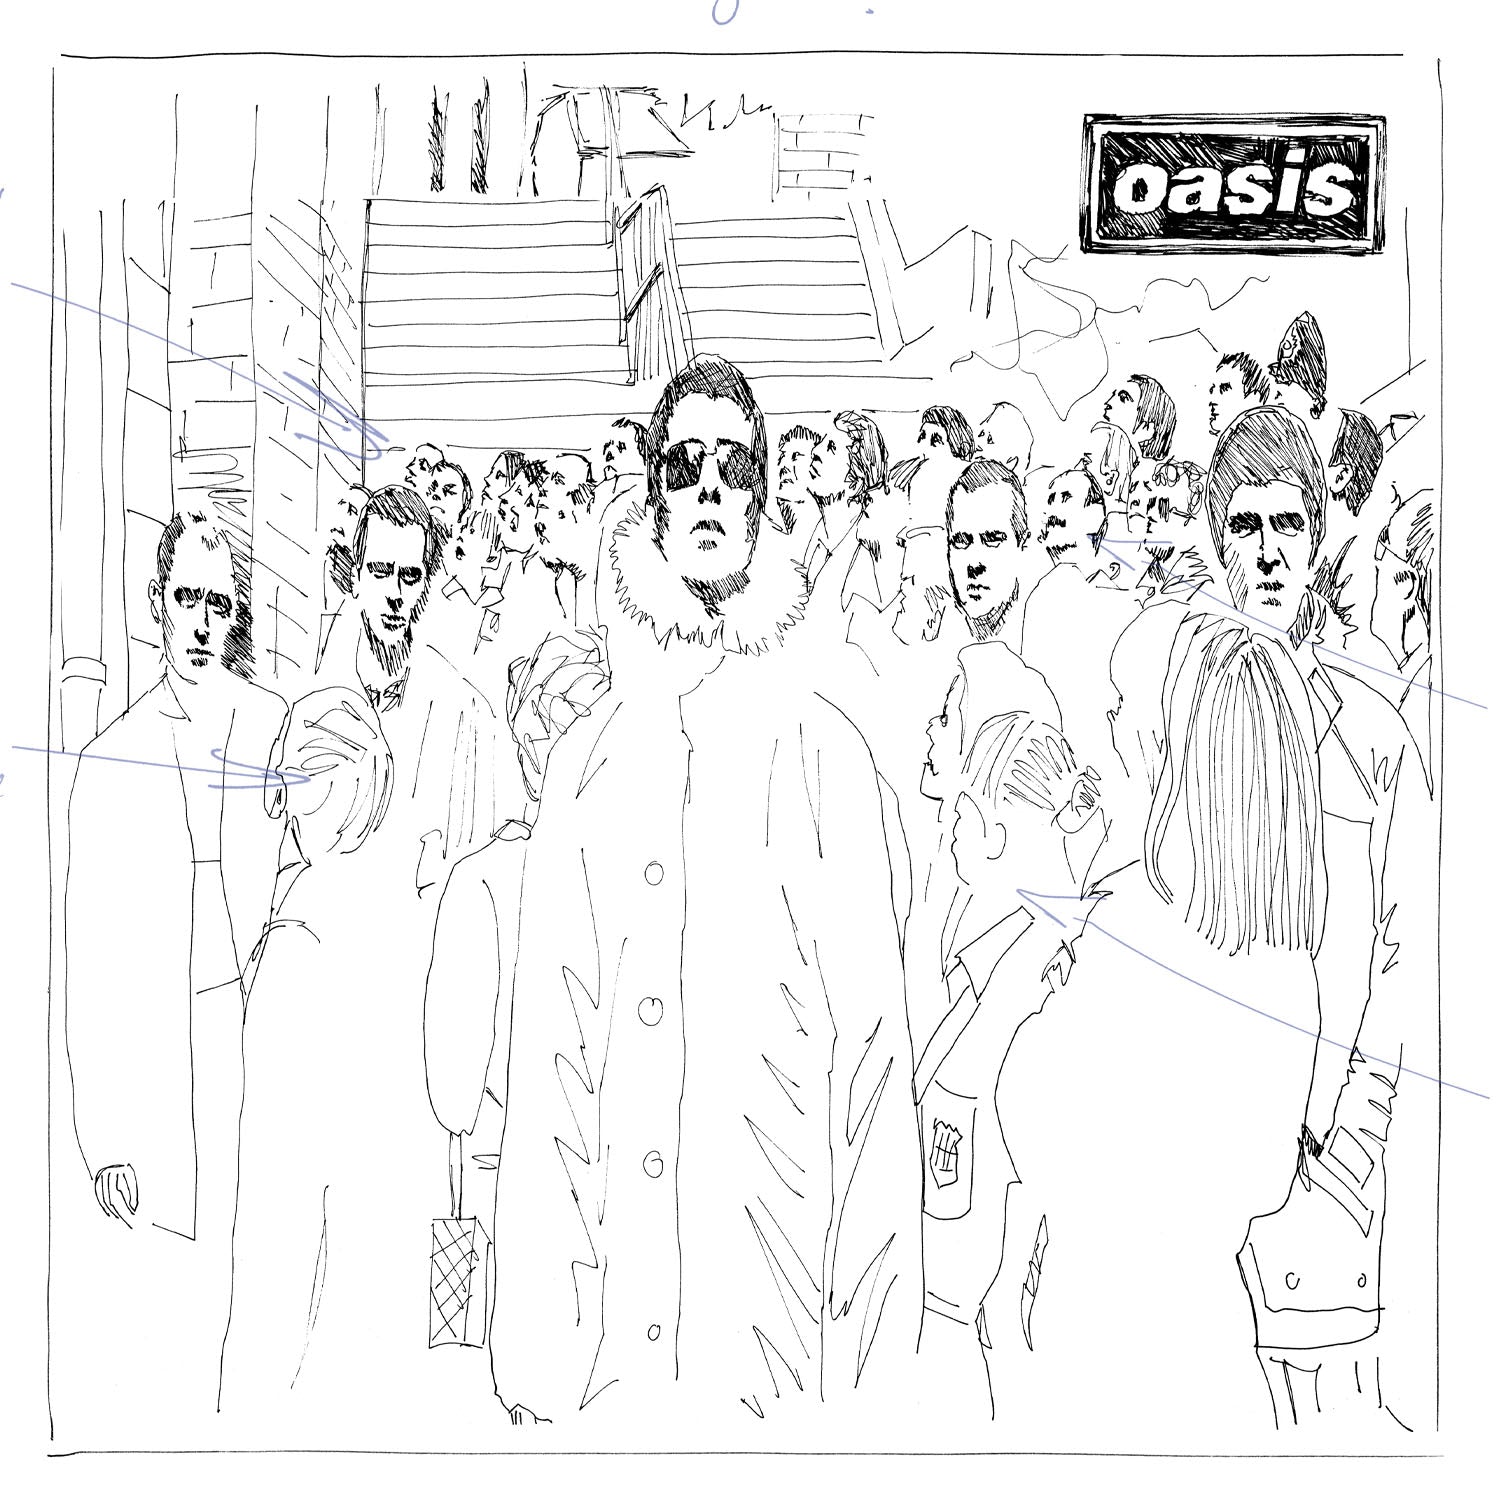 Oasis - D'You Know What I Mean? - Ltd Edition Illustration Print